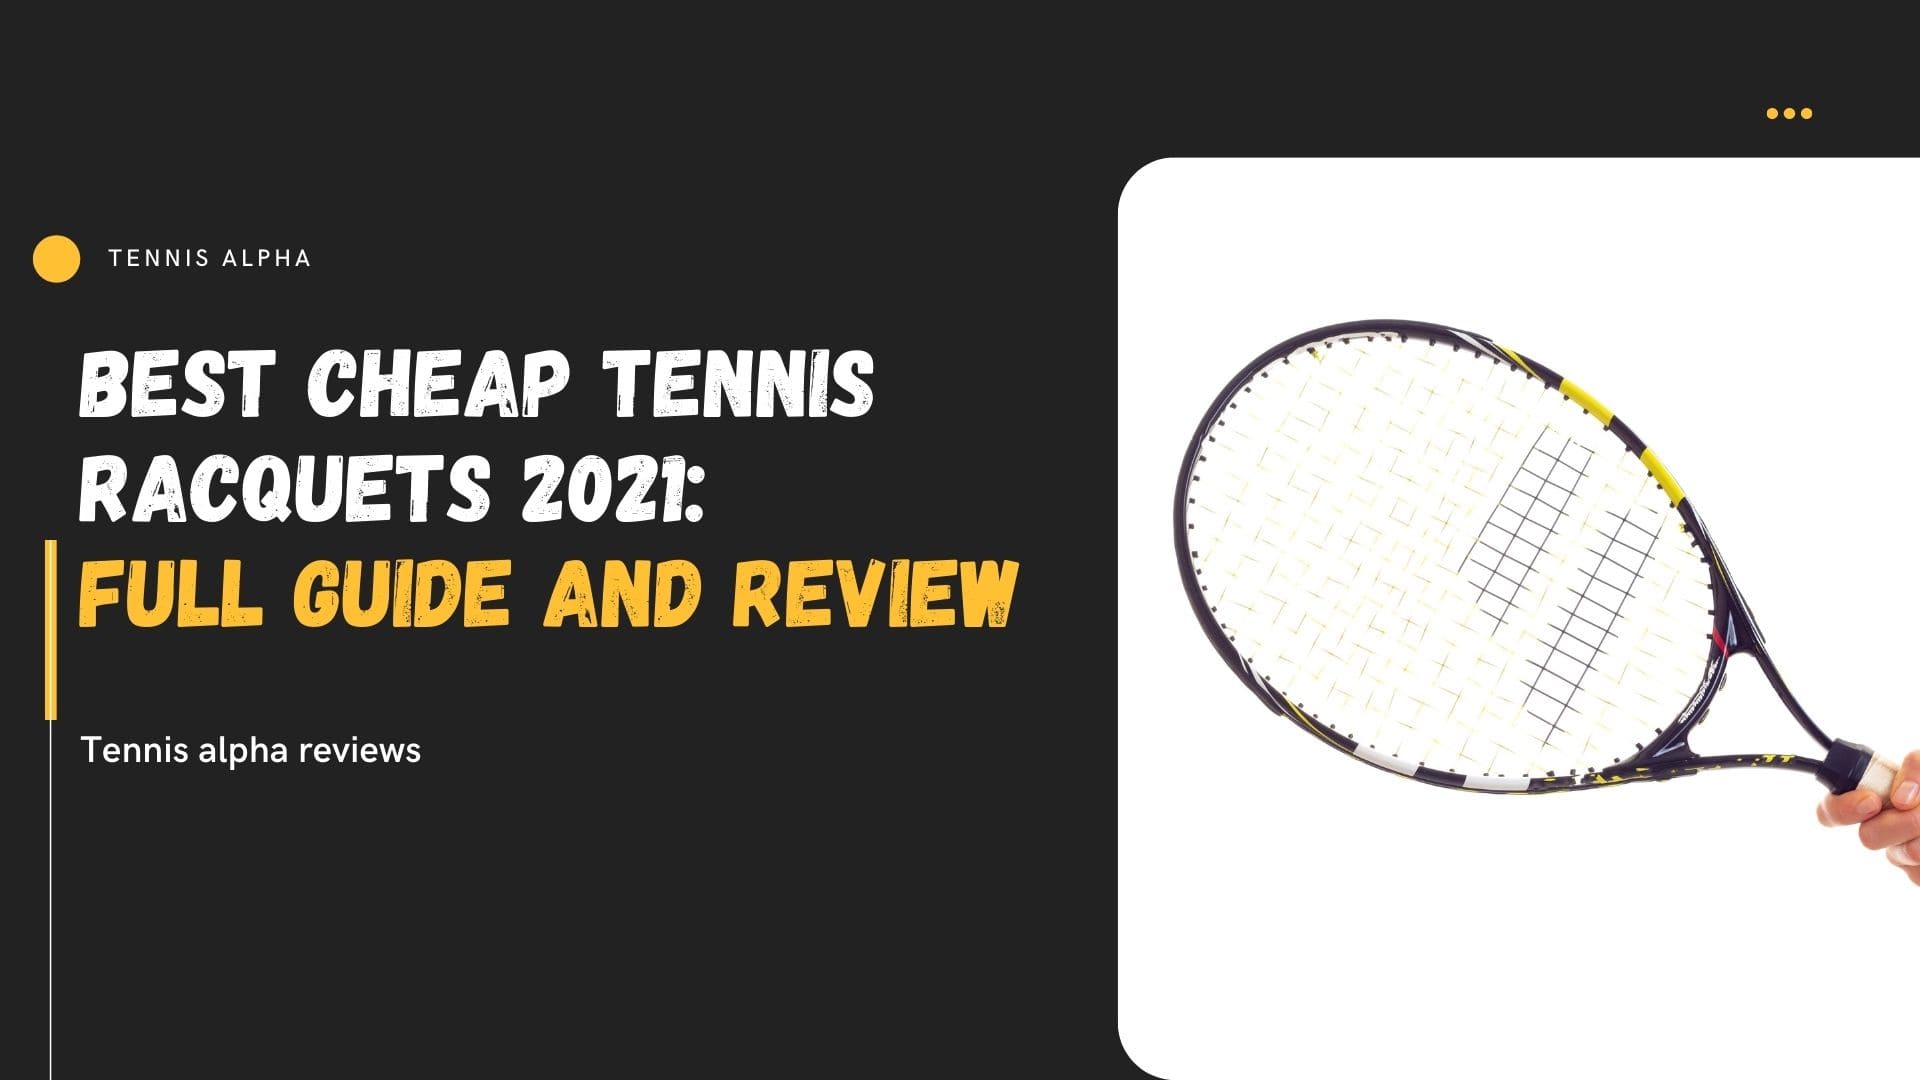 Best Cheap Tennis racquets 2021: Full Guide and Review